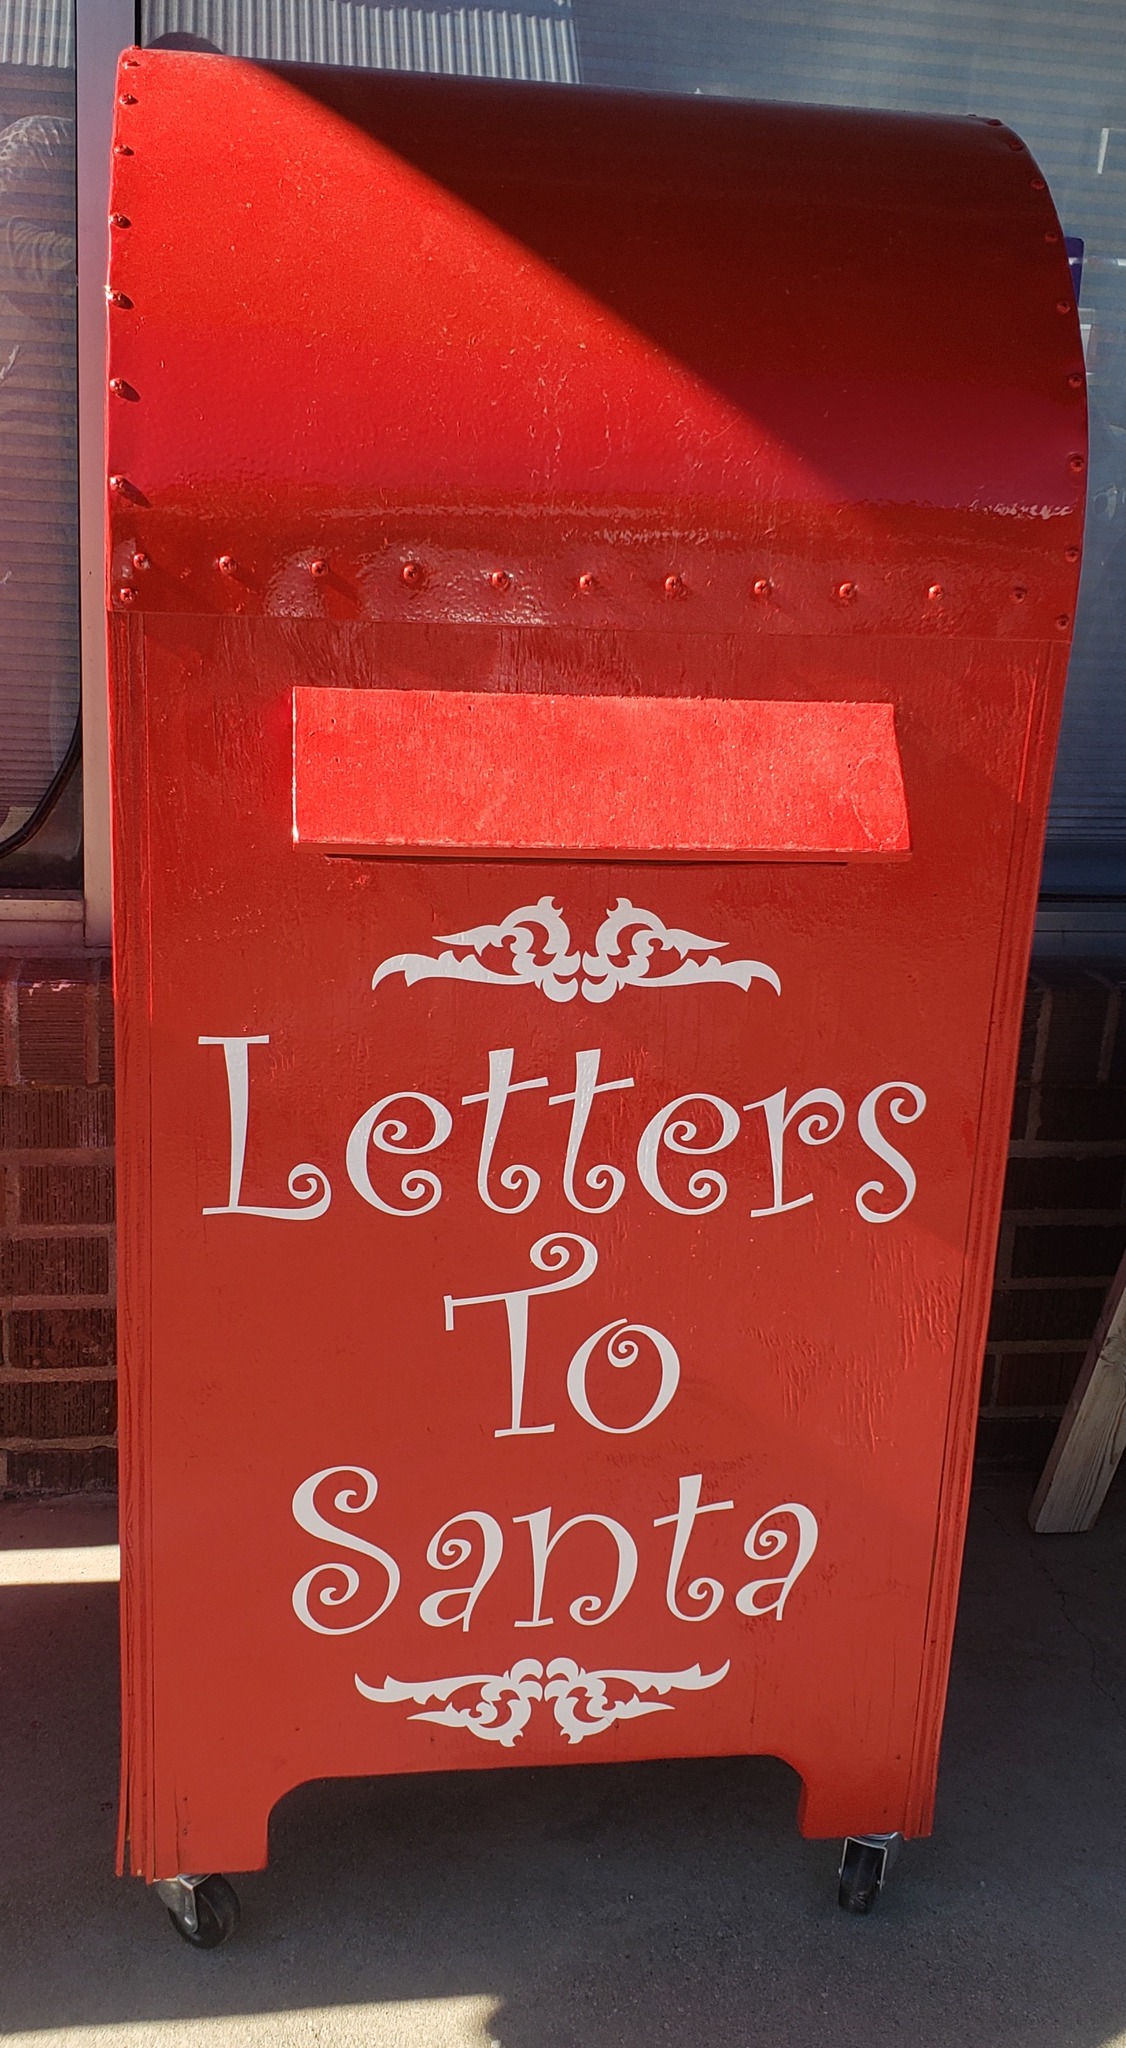 Image of a large red letter box. On the front there is a slot for letters to be deposited. In white text the mail box reads "Letters to Santa"